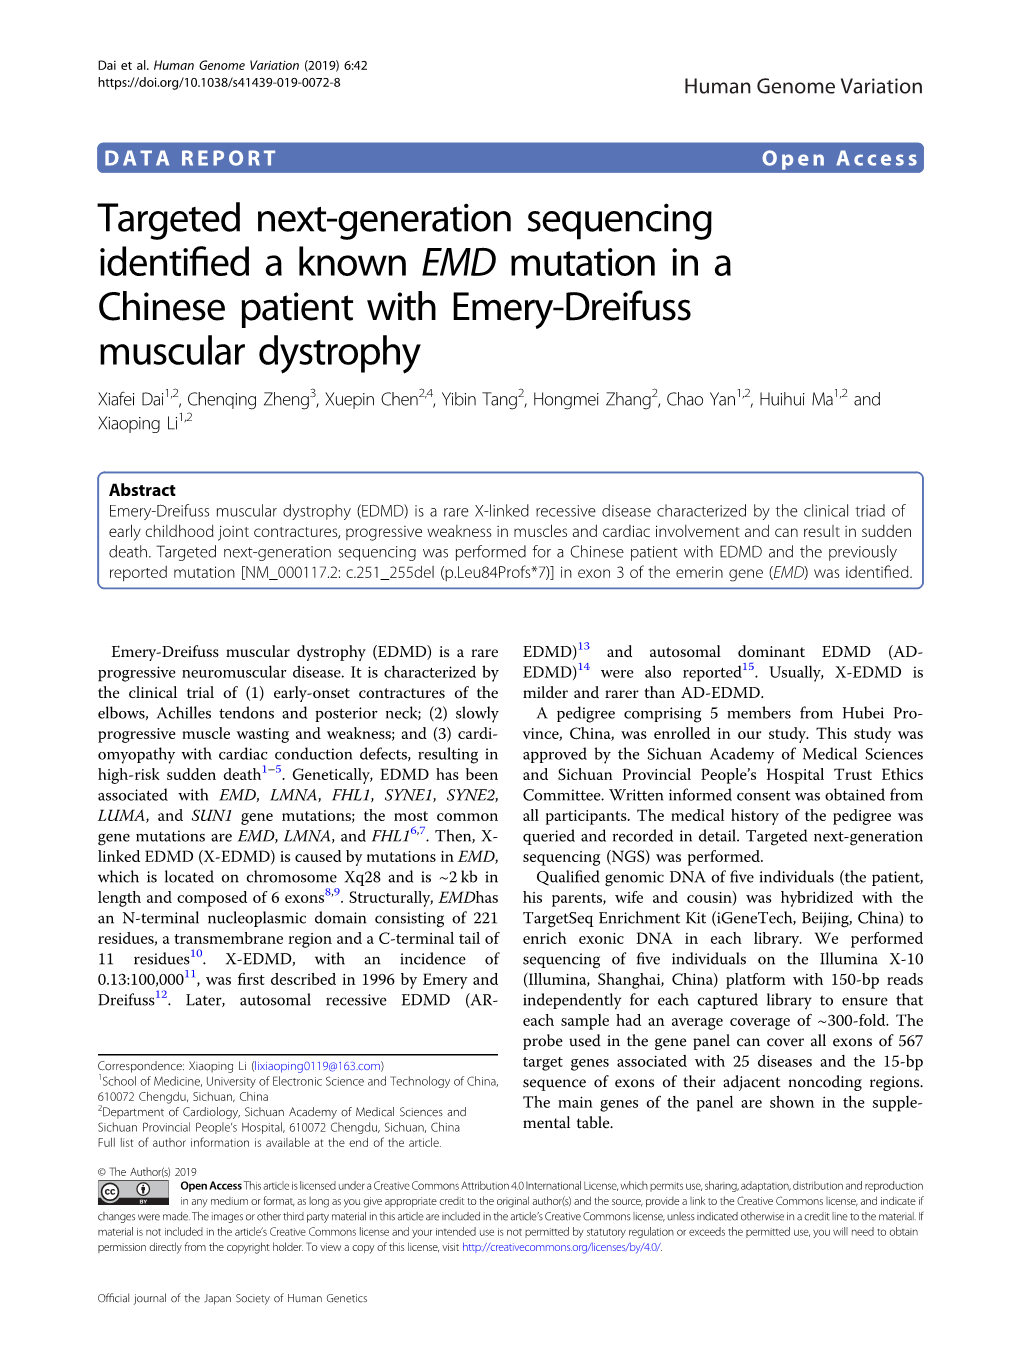 Targeted Next-Generation Sequencing Identified a Known EMD Mutation In